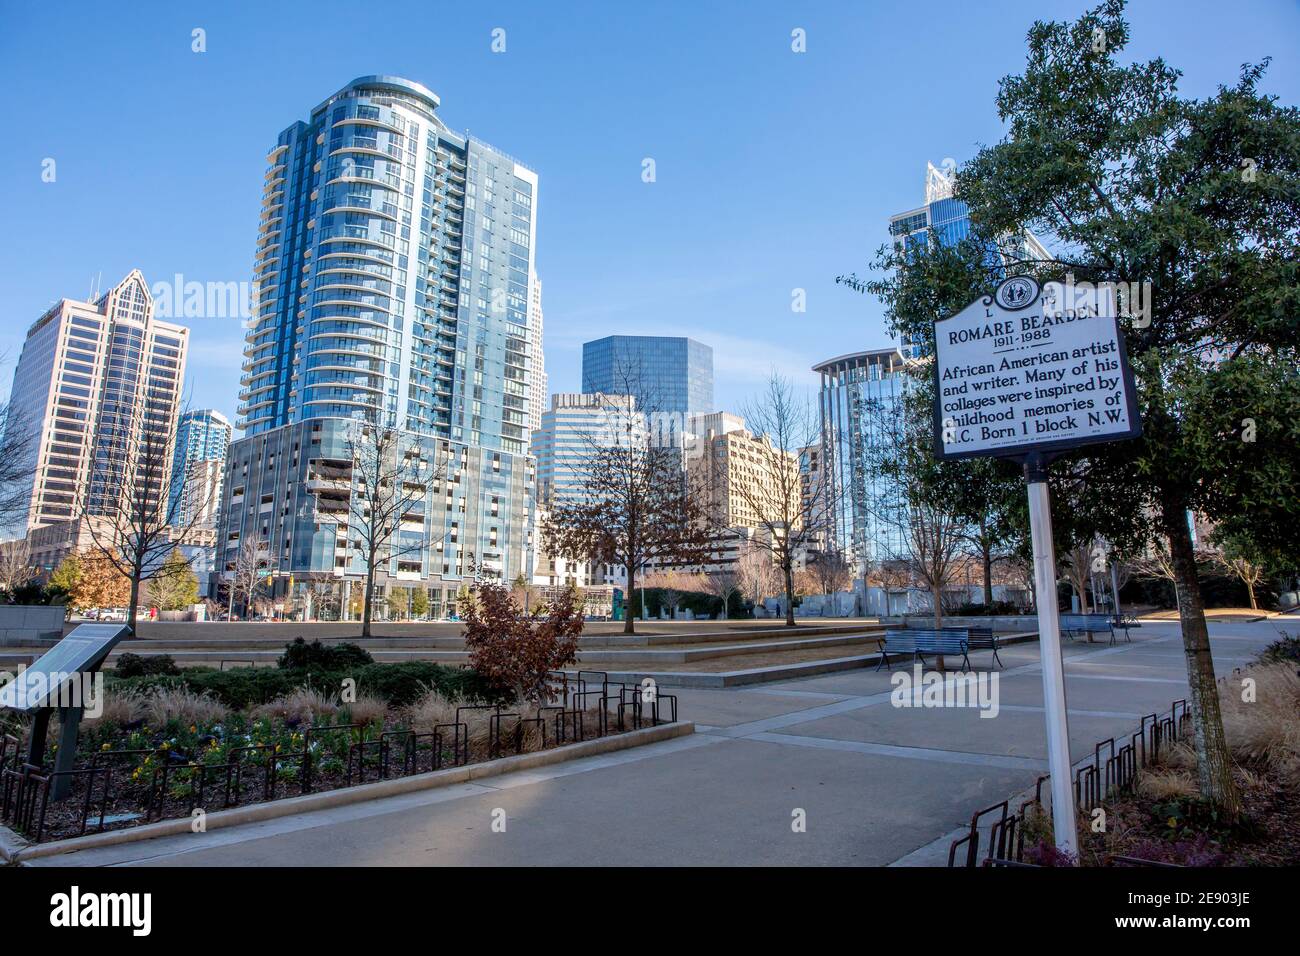 A view of the Charlotte, North Carolina, skyline in a bright blue sky as seen from Romare Bearden Park. Stock Photo